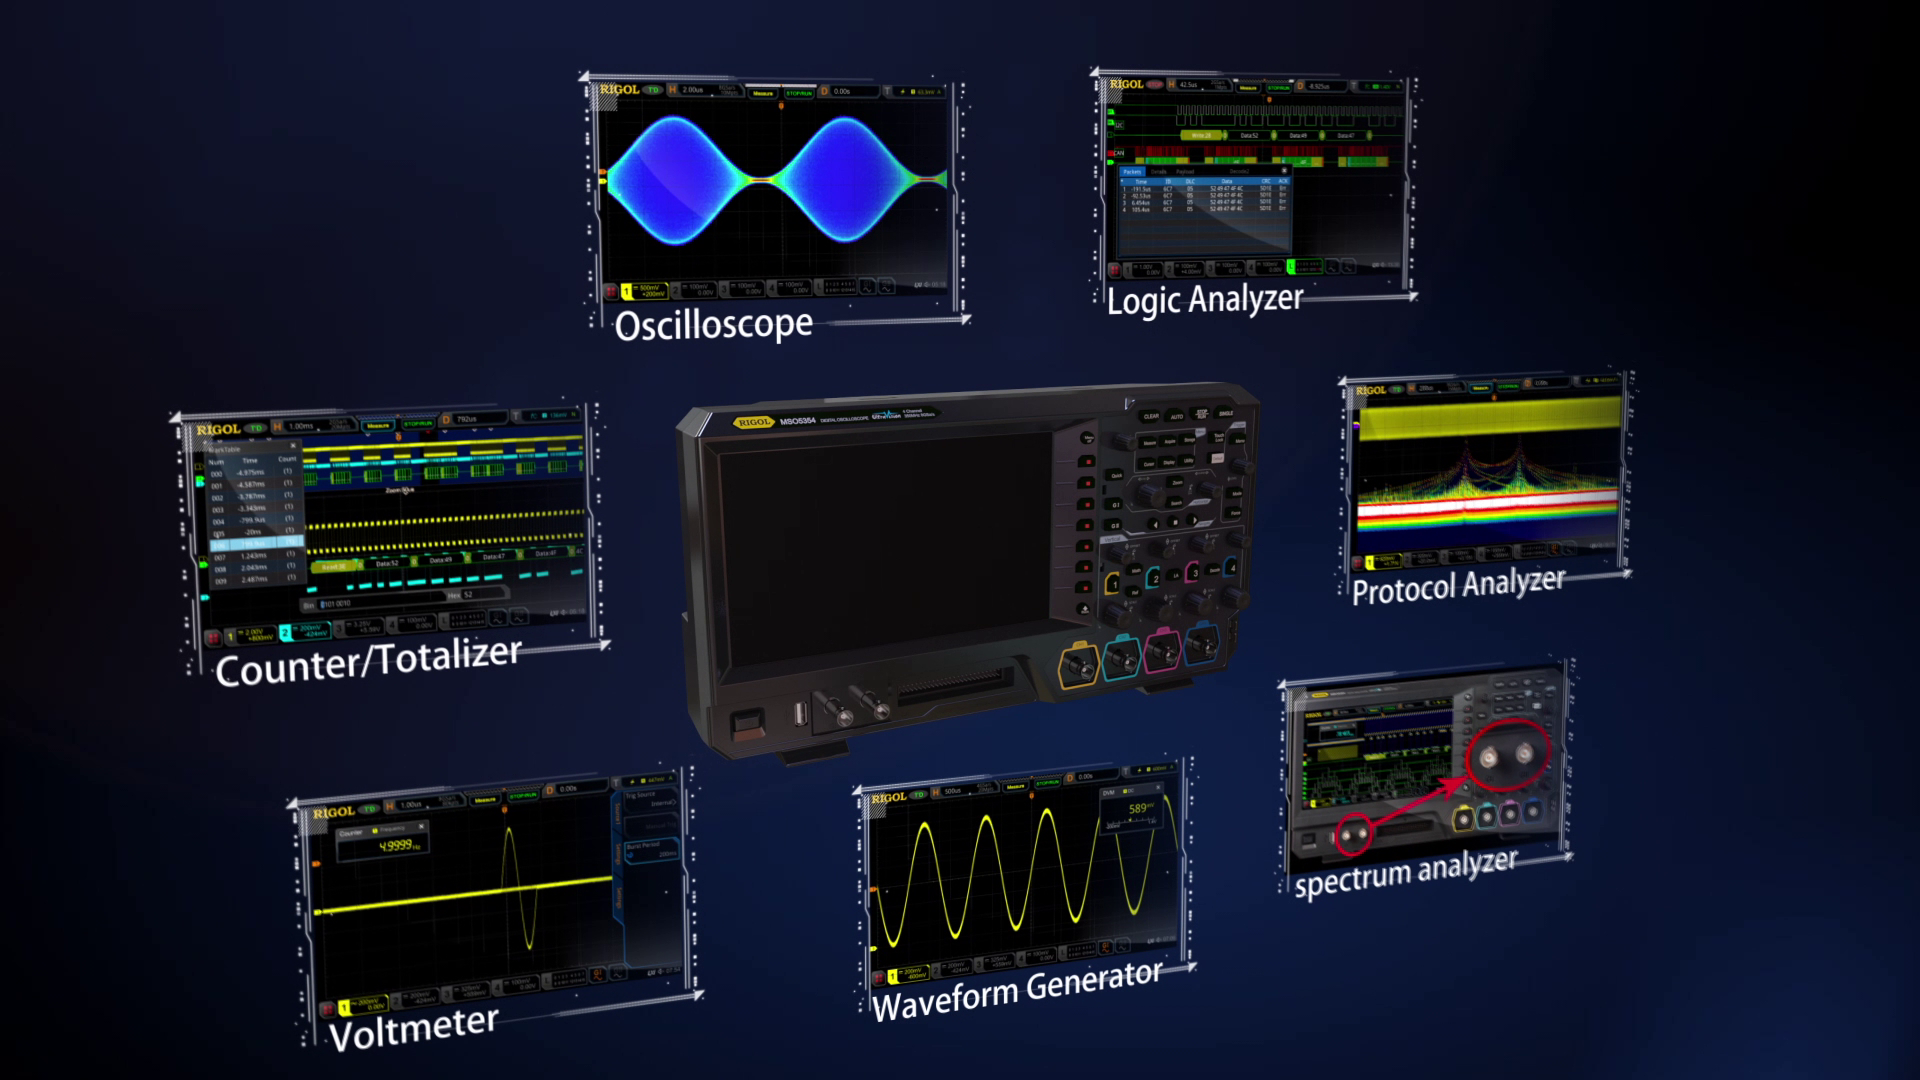 Combine an Oscilloscope, Spectrum Analyzer, Logic Analyzer, Protocol Analyzer, Waveform Generator, Voltmeter, and Counter/Totalizer in one instrument to quickly find answers to your measurement challenges.